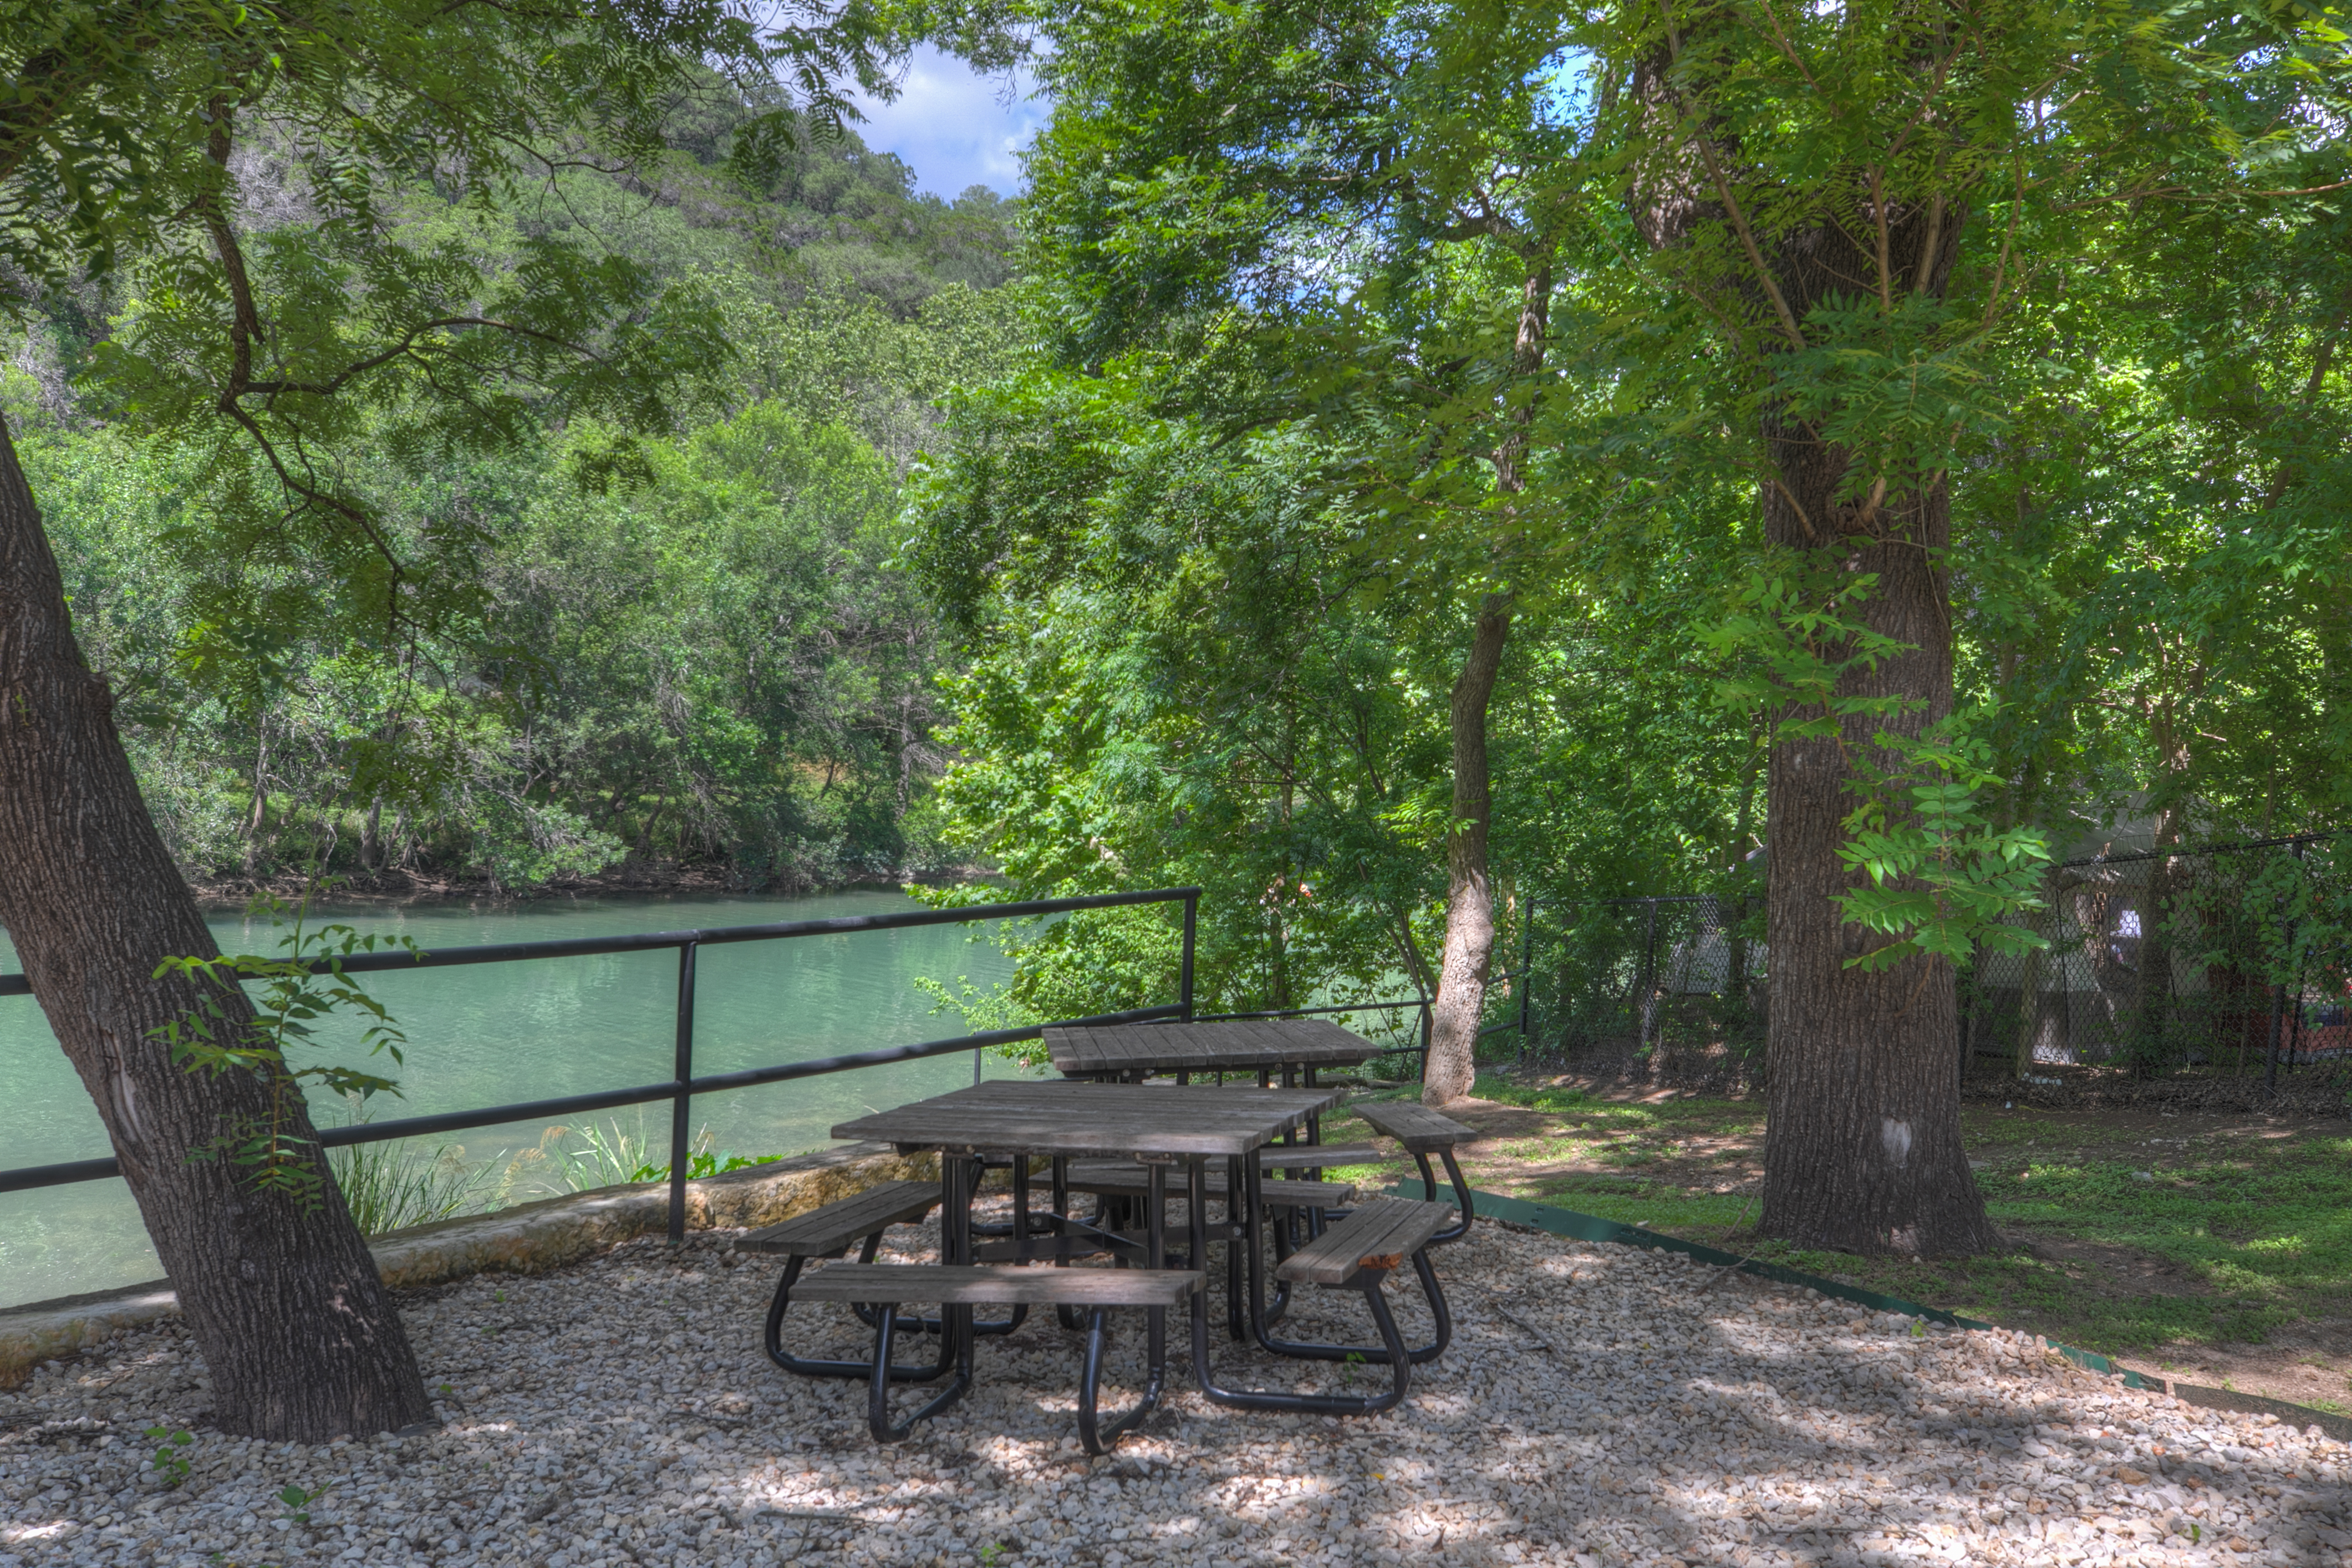 Enjoy an afternoon snack at the picnic area on the Guadalupe River.